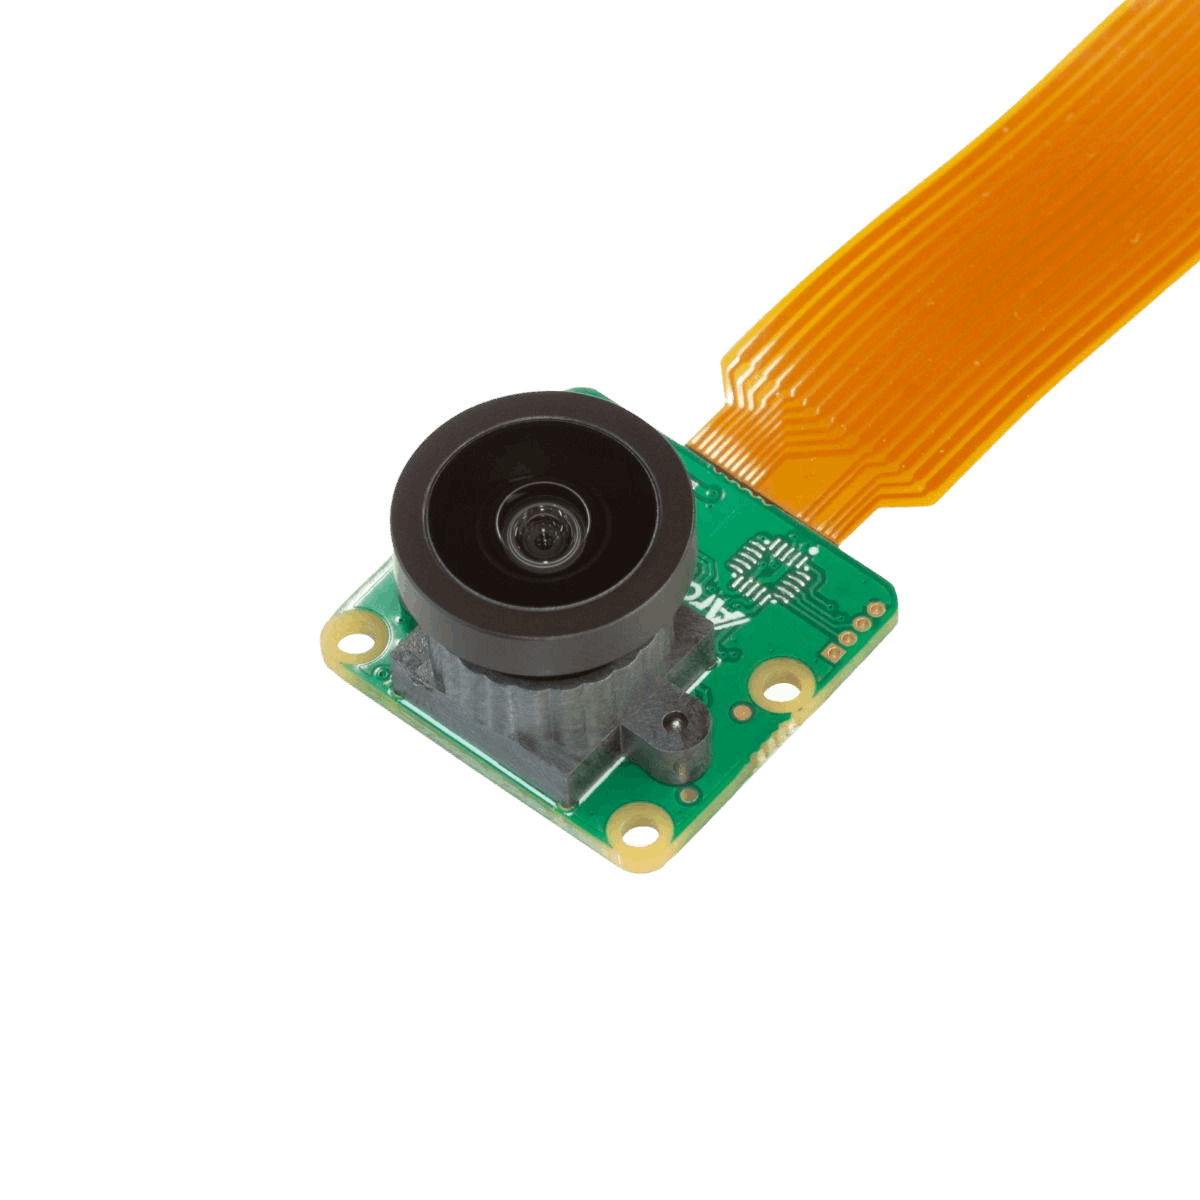 Arducam B0482 camera module viewed from an angle